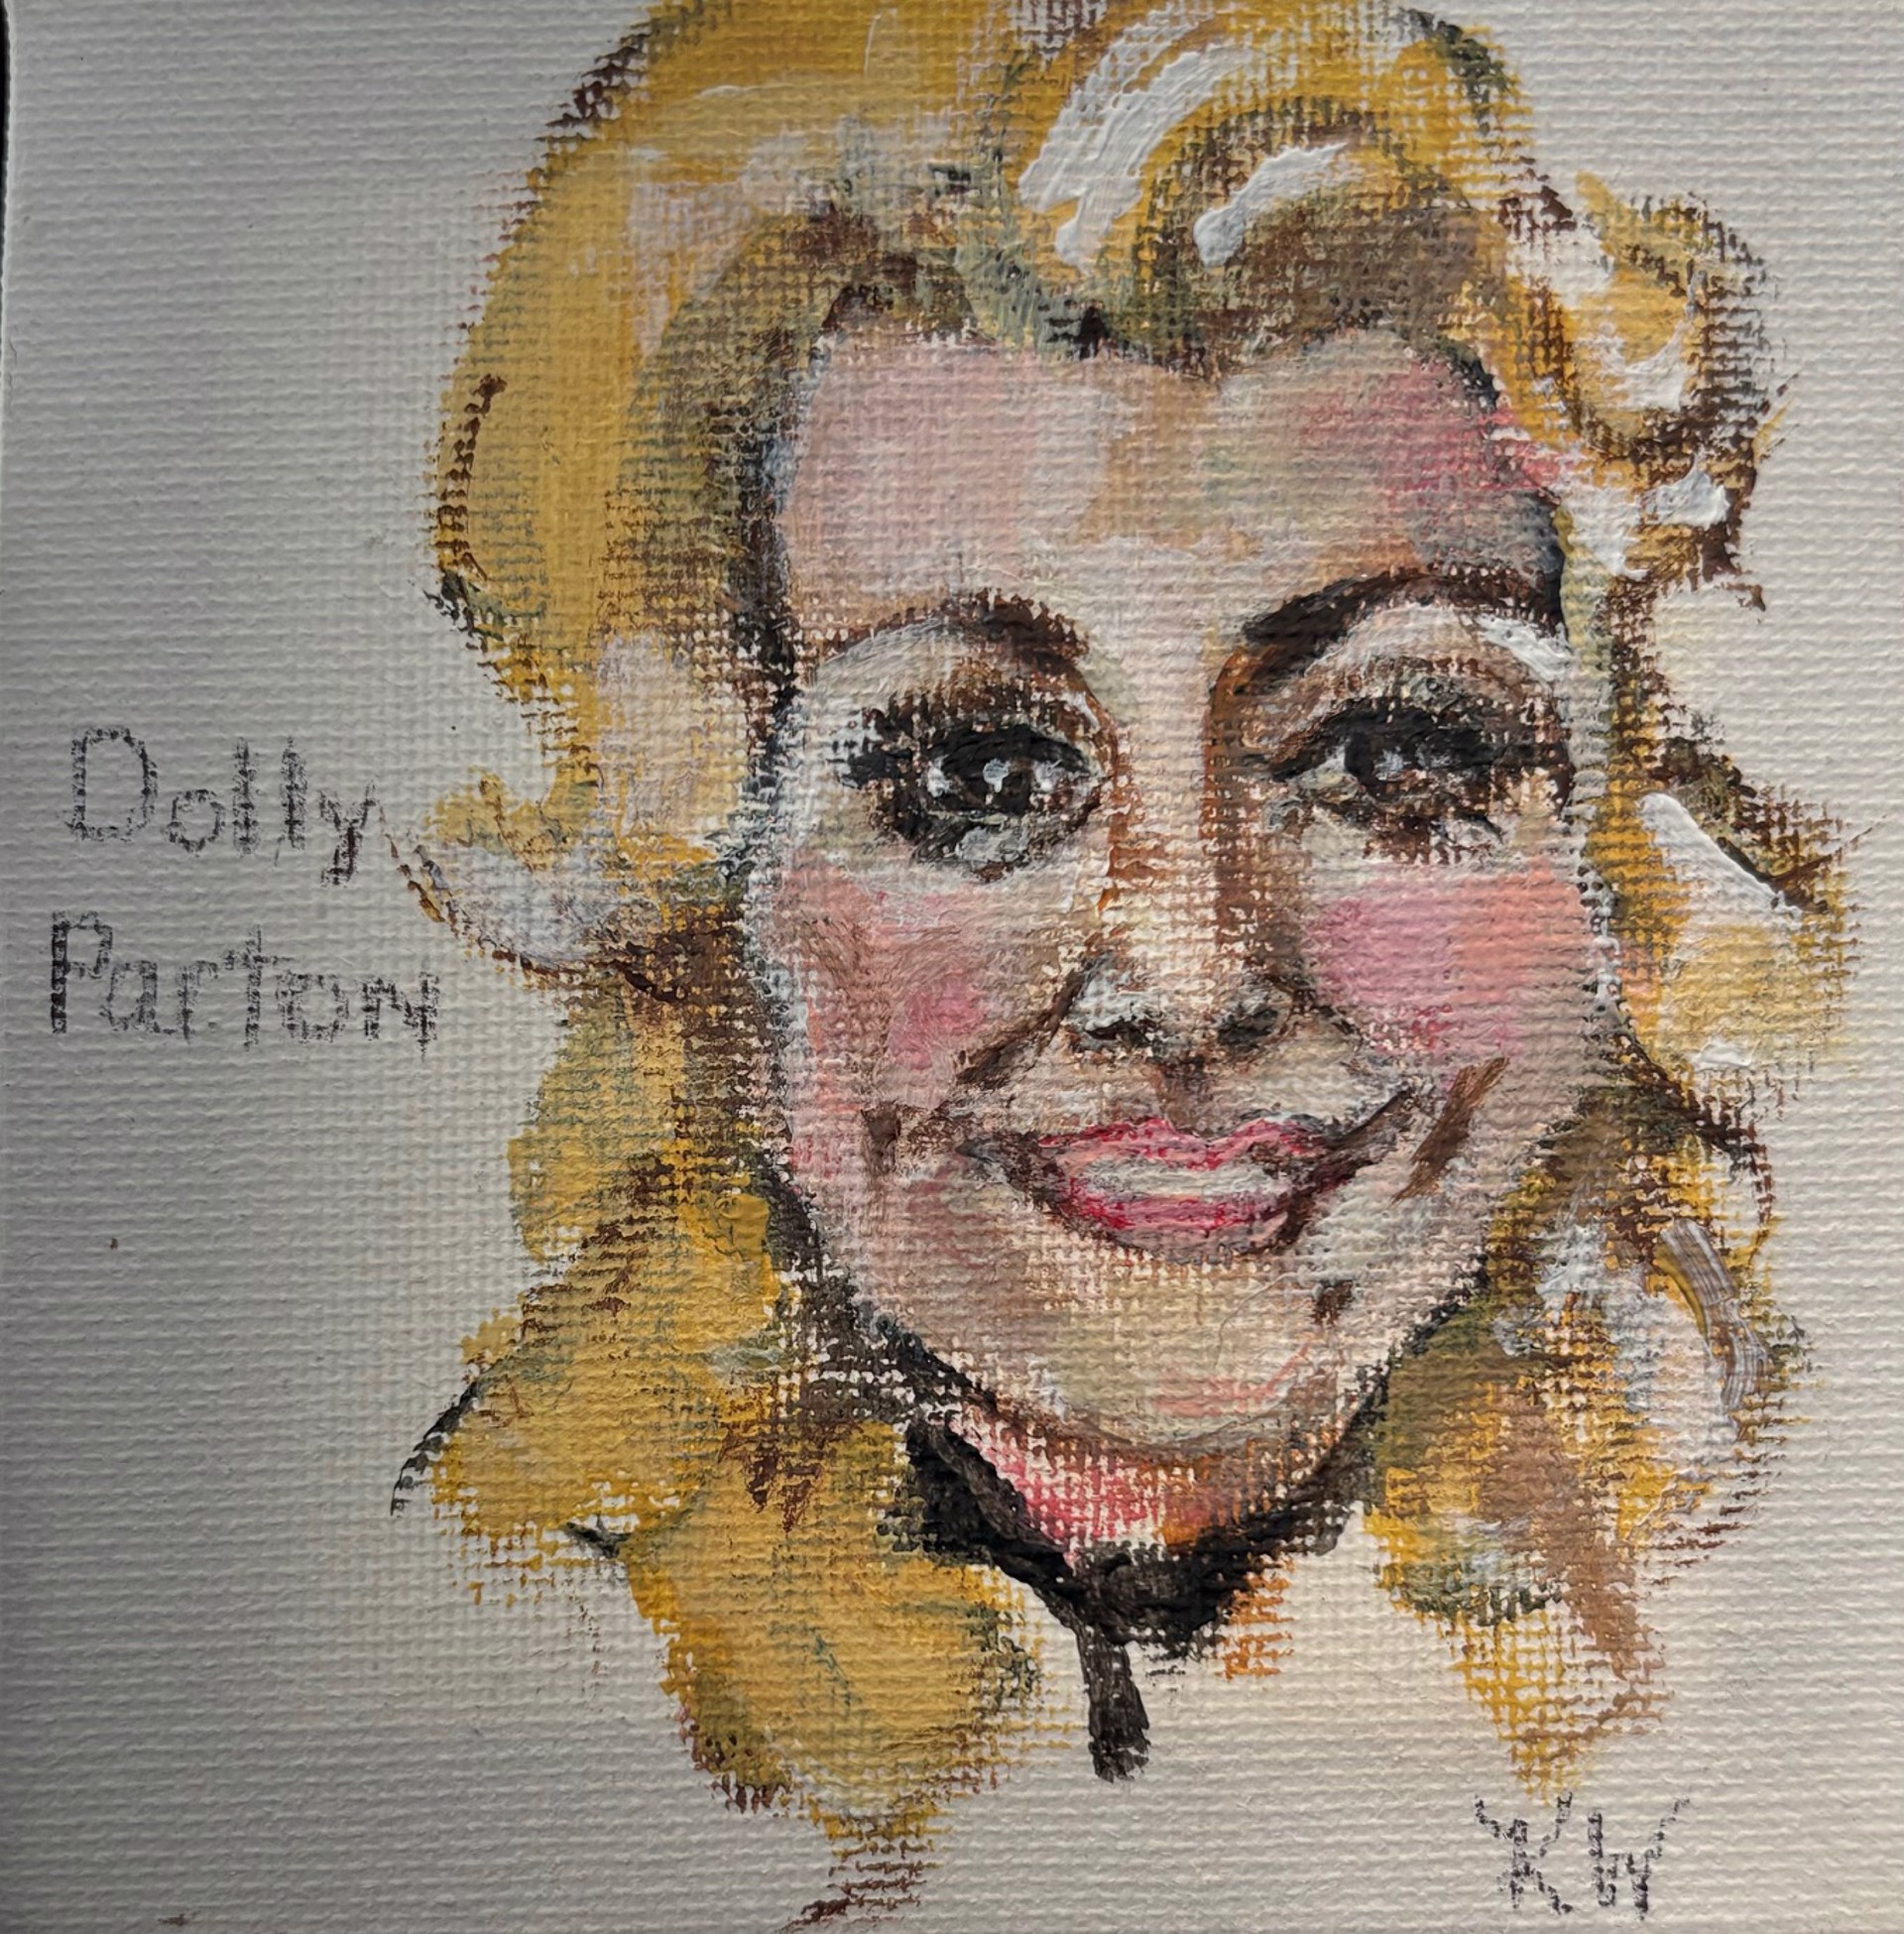 Dolly Parton Painting by Kathy Willingham